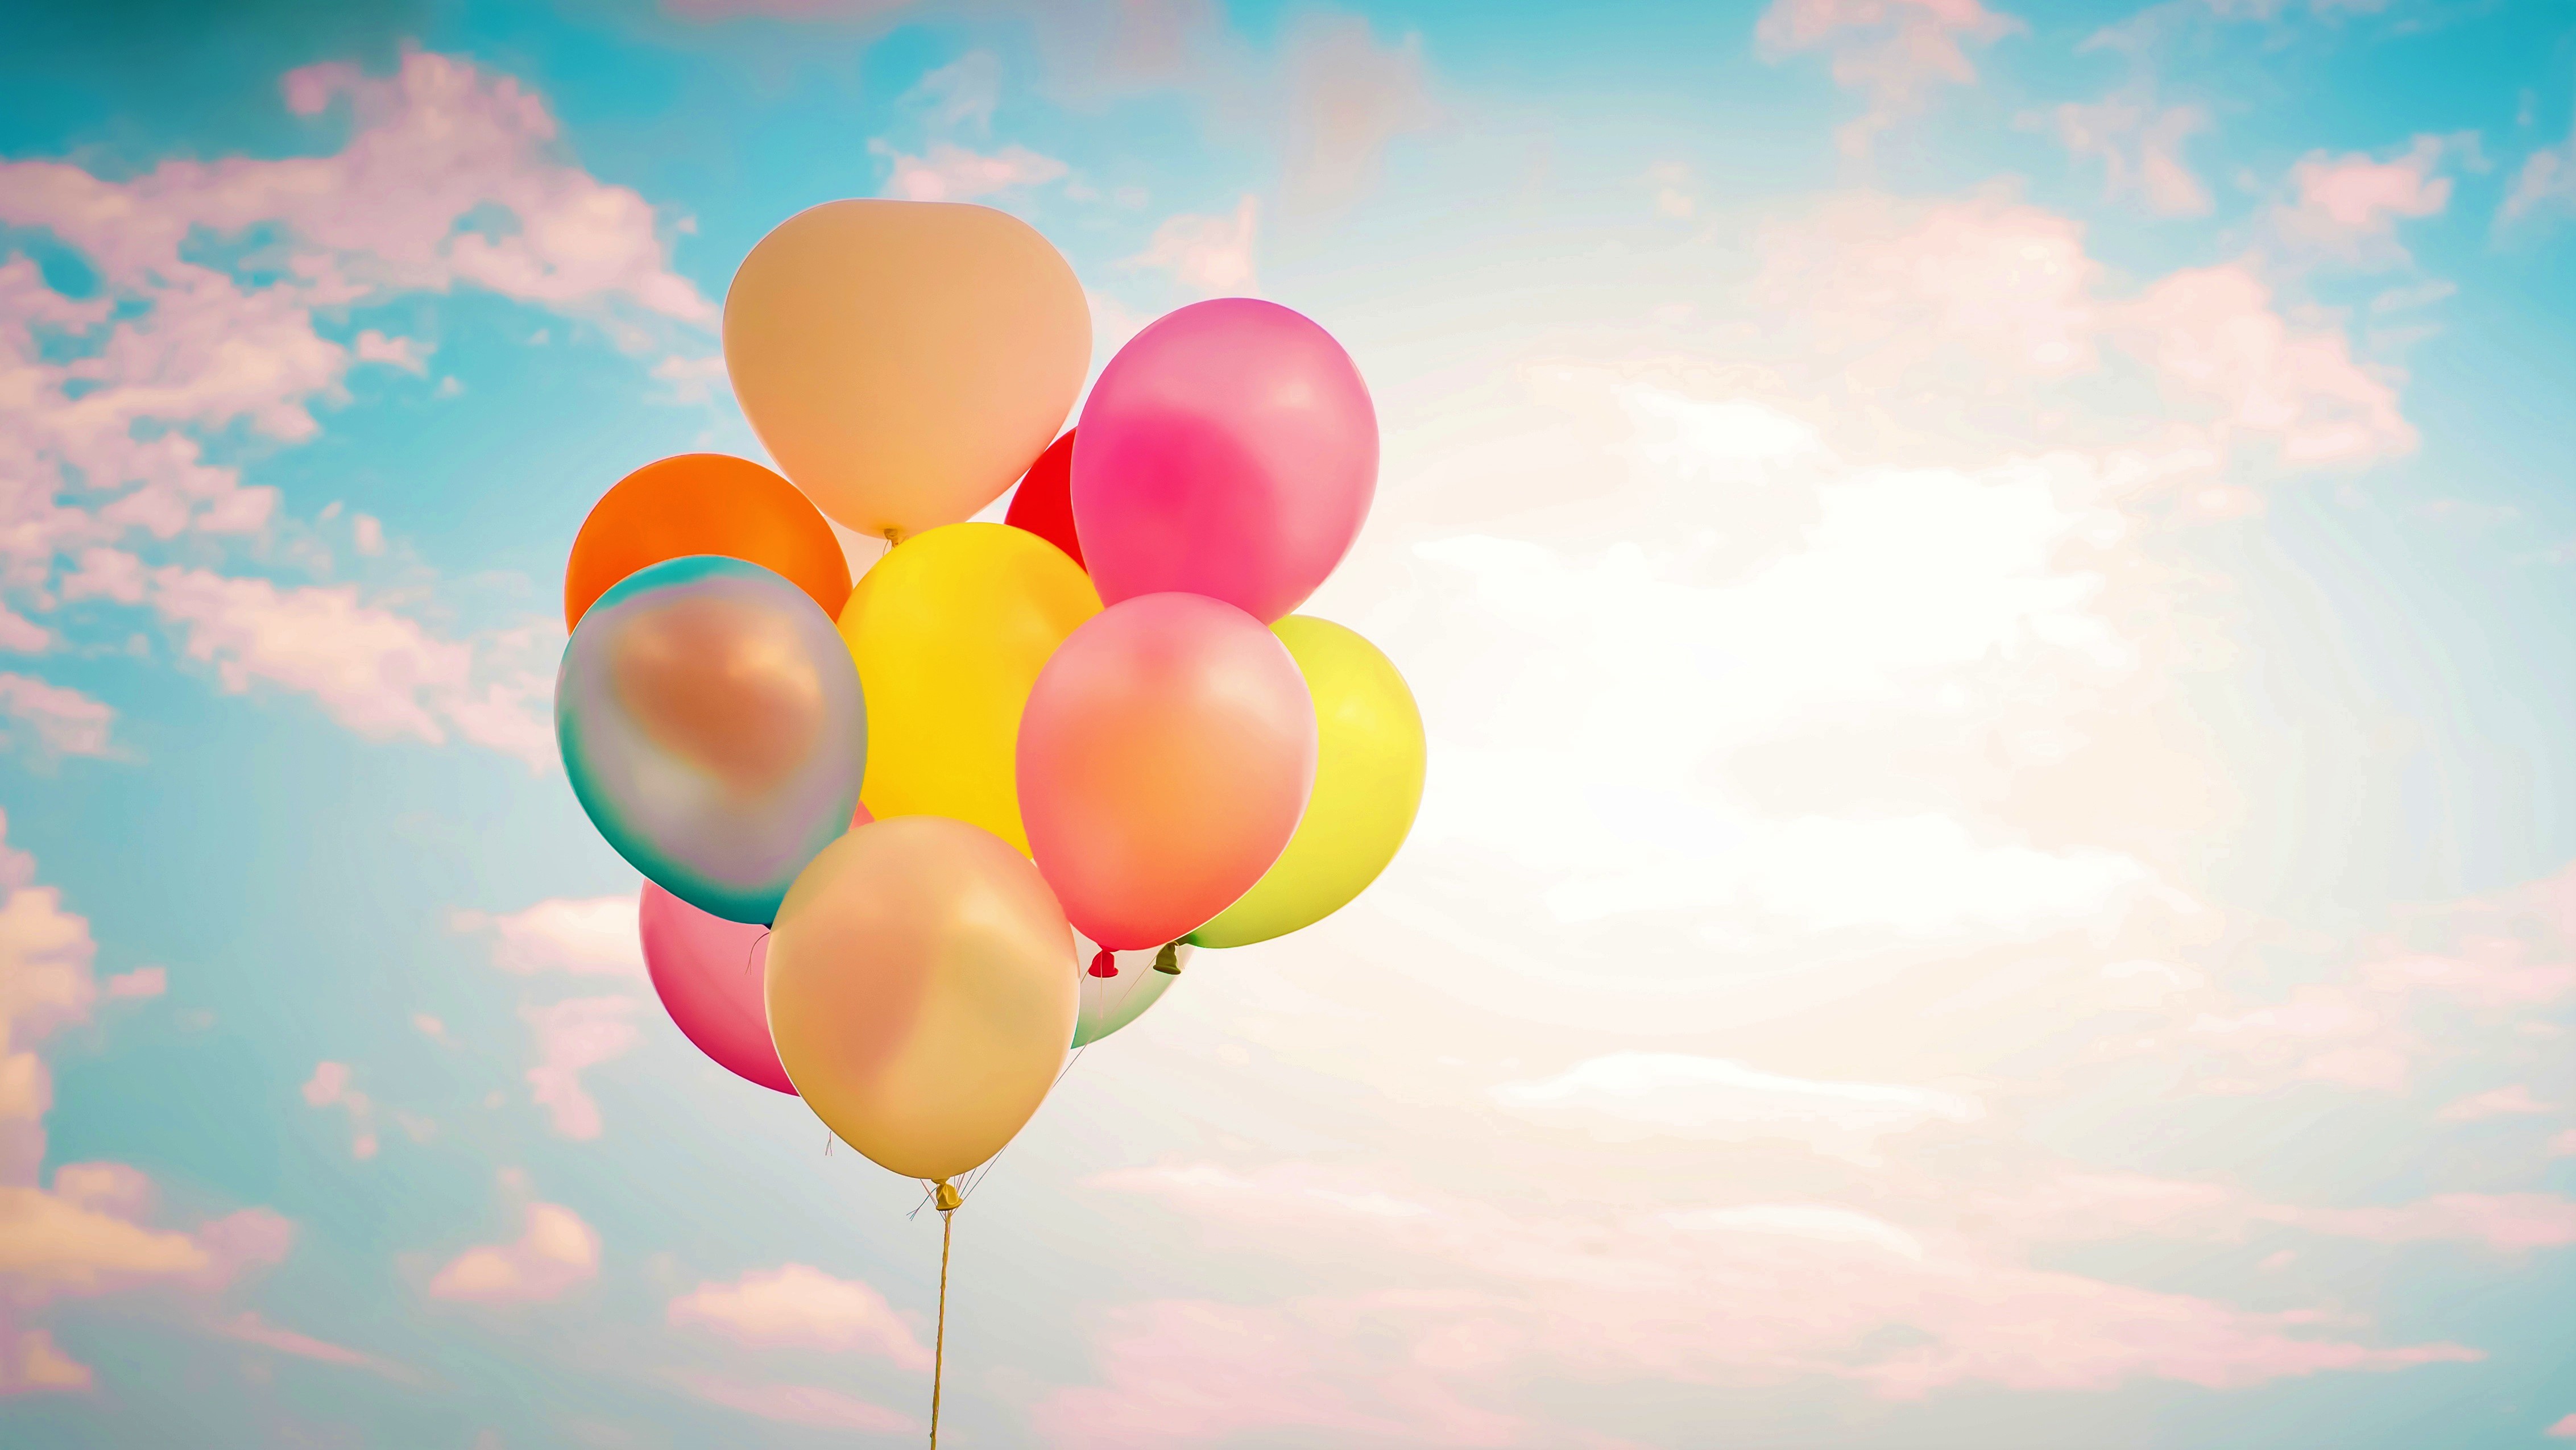 Colorful Balloons  4k Ultra HD Wallpaper  Background Image 